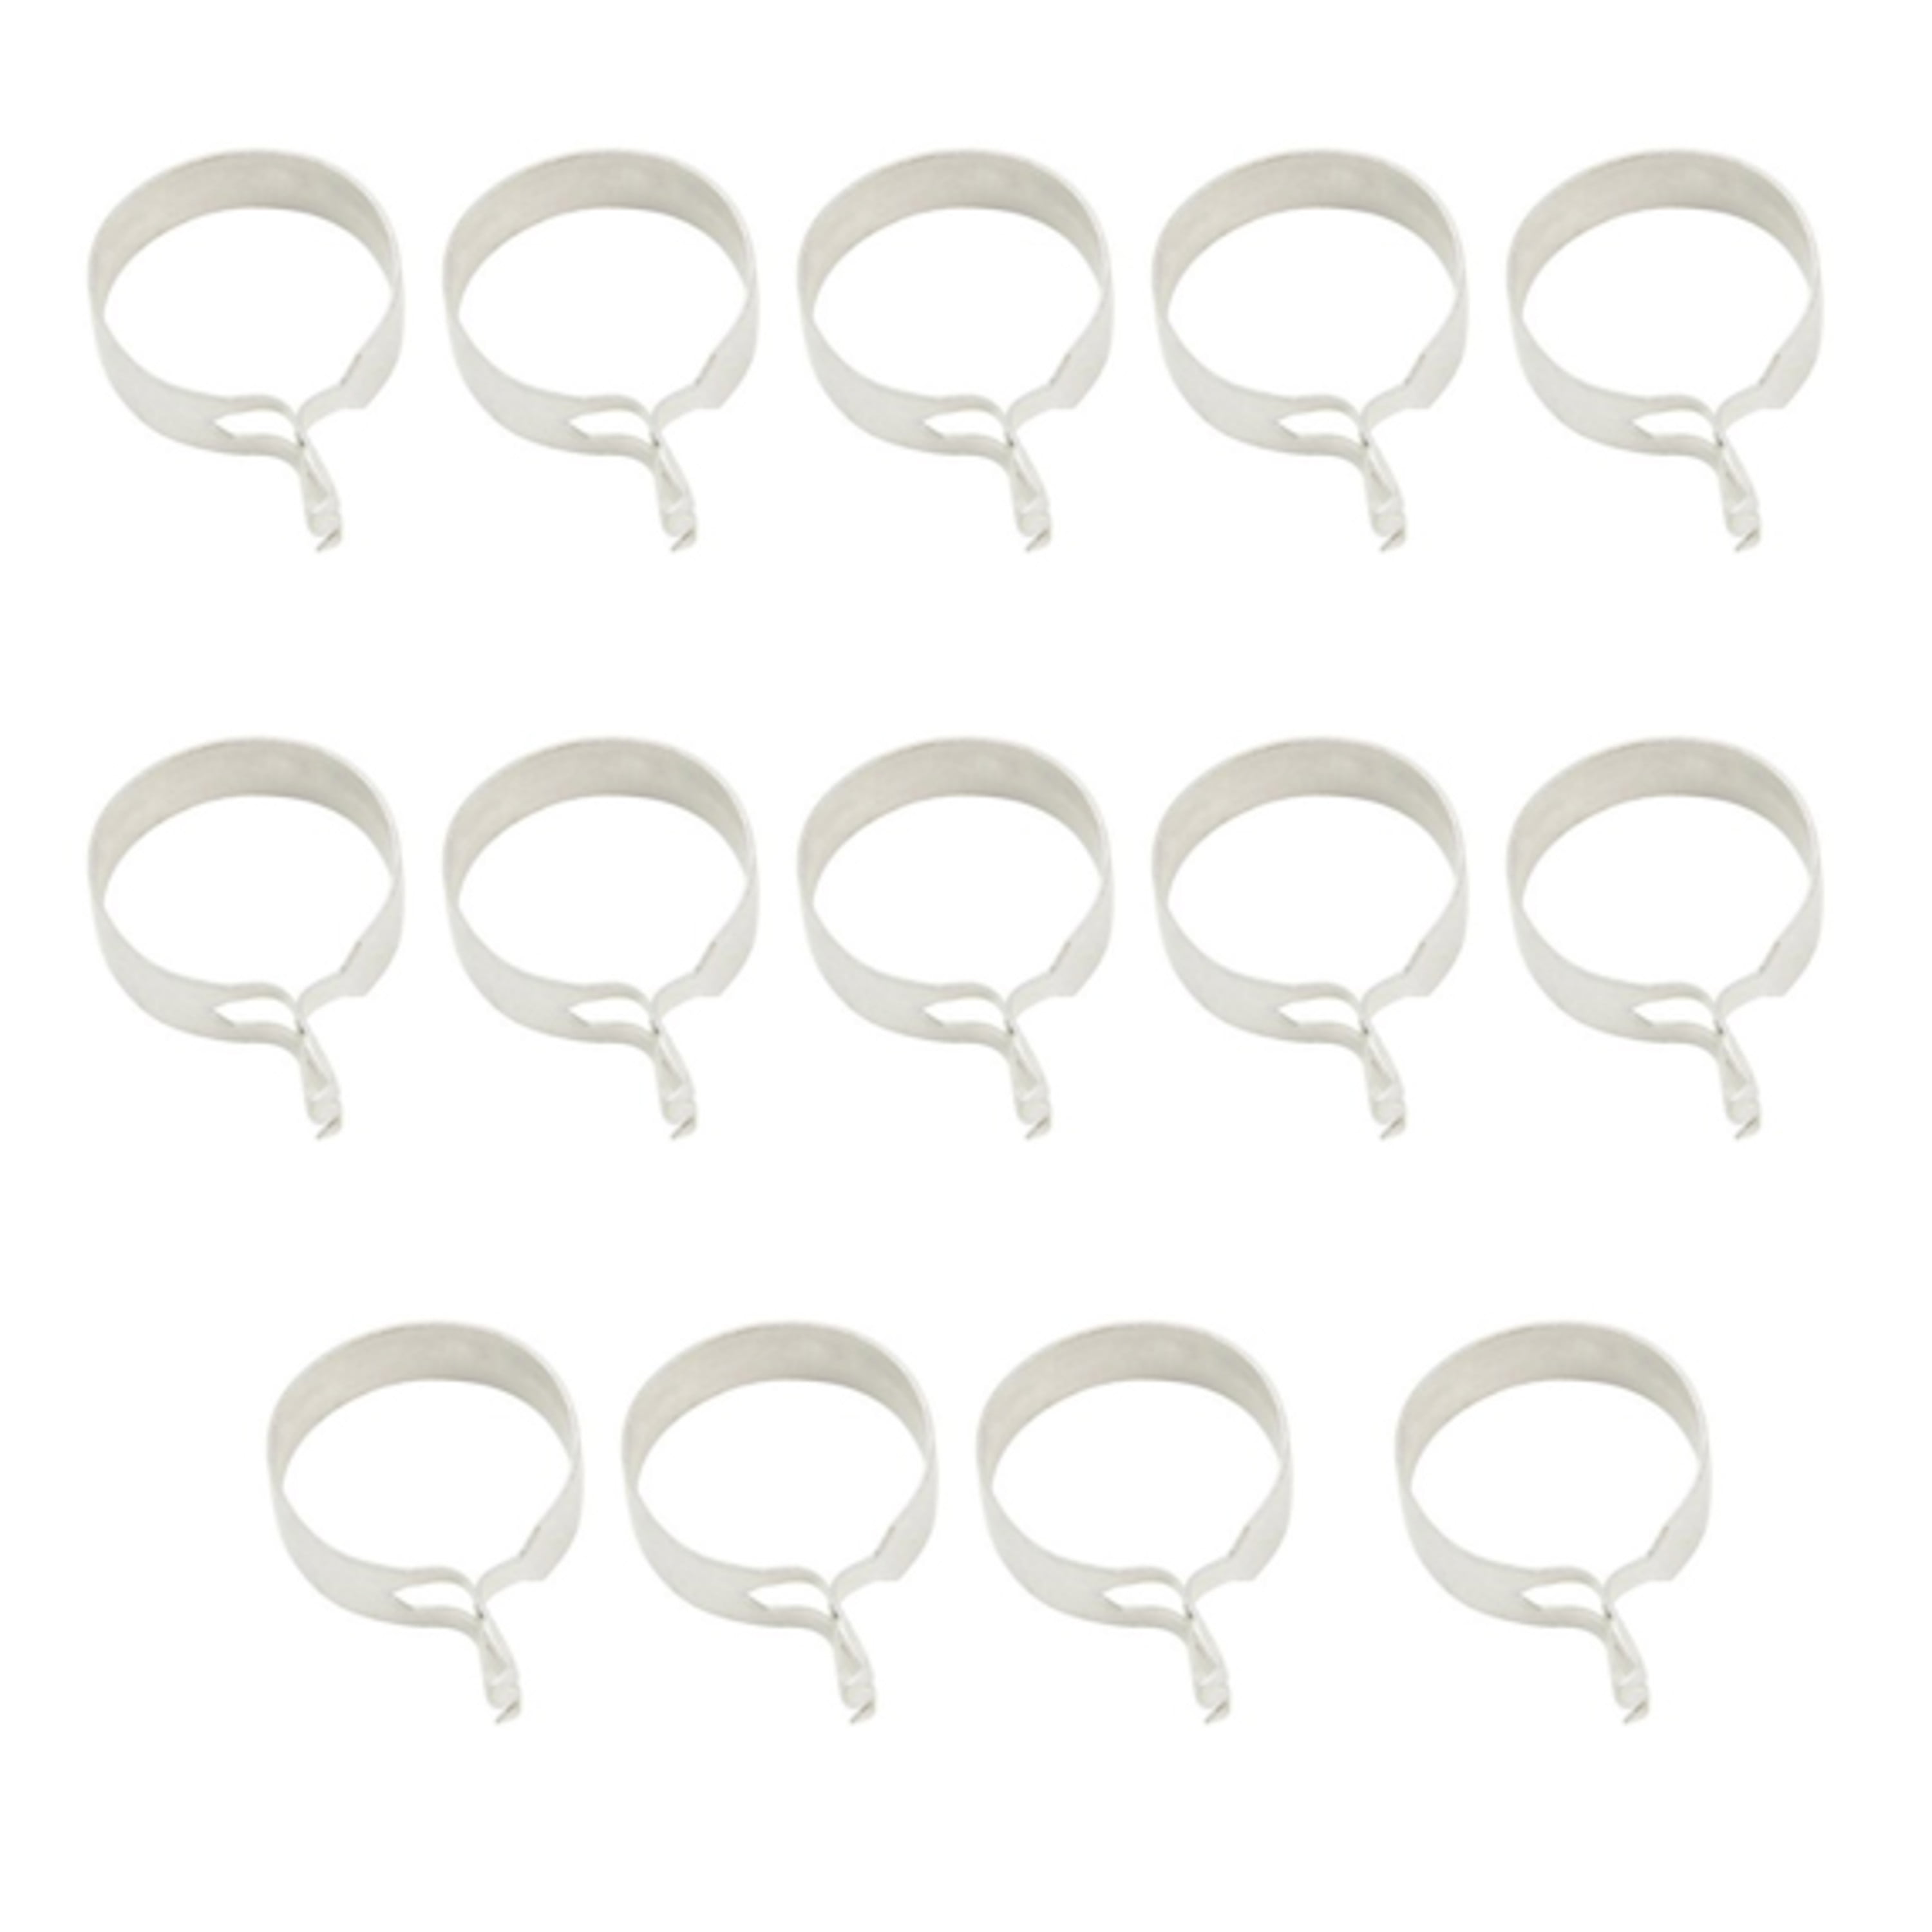 Amazon.com: WeeksEight 40 Pack White Curtain Rings with Clips, Curtain  Hooks Hangers Clip Rings for Hanging Drapes Bows Hat, Drapery Rings 1.5 in  I D, Fits up to 1.2 in Diameter Curtain